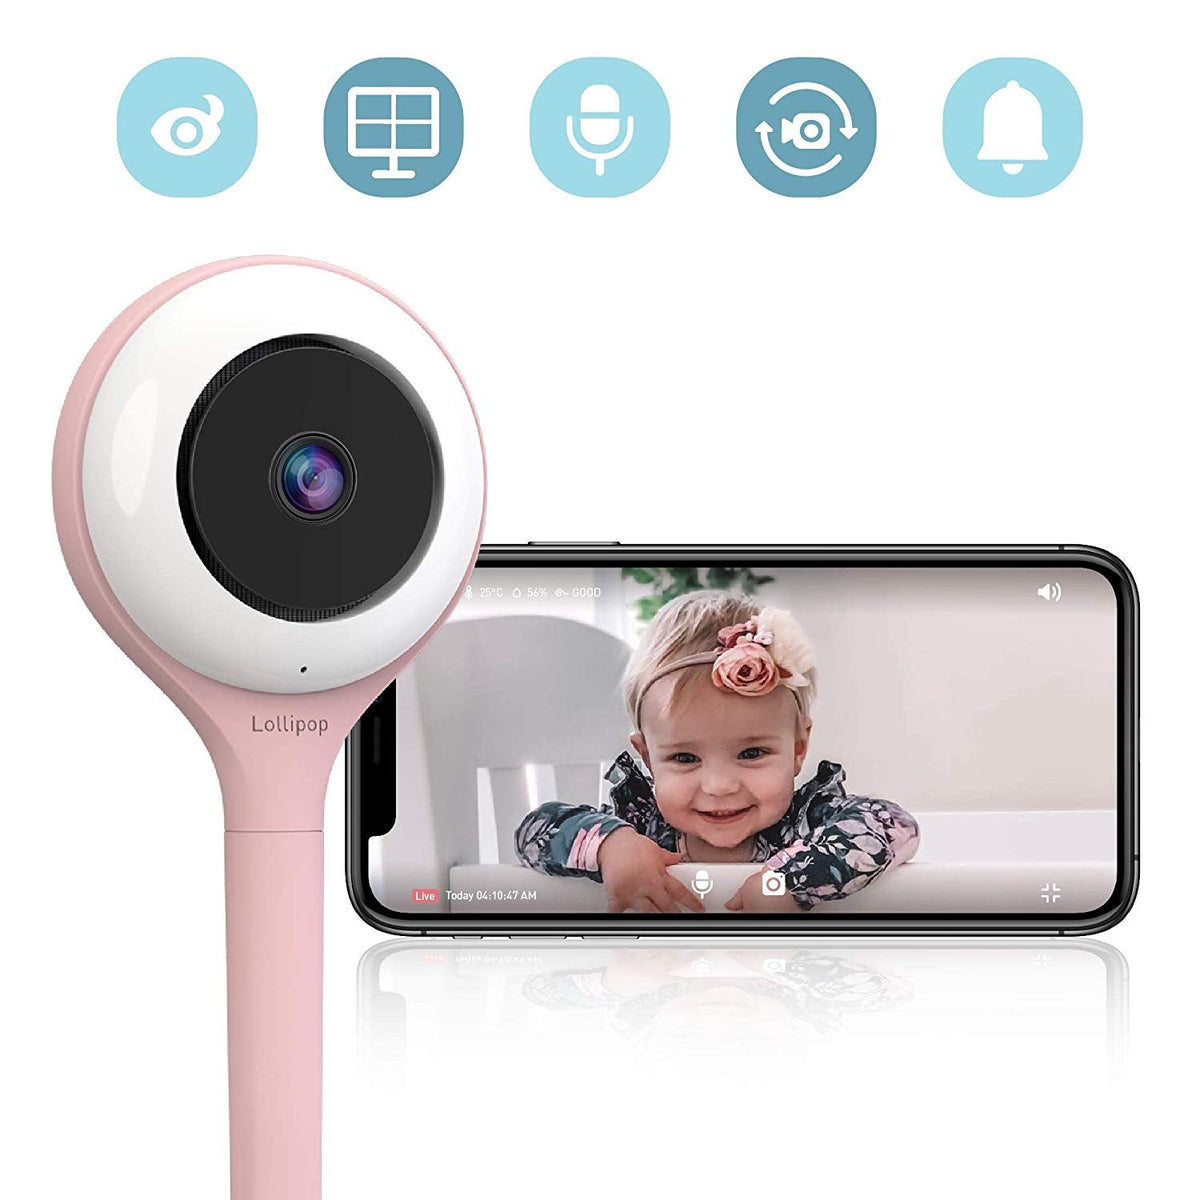 [OPEN BOX] LOLLIPOP HD WiFi Video Baby Monitor - Cotton Candy Pink